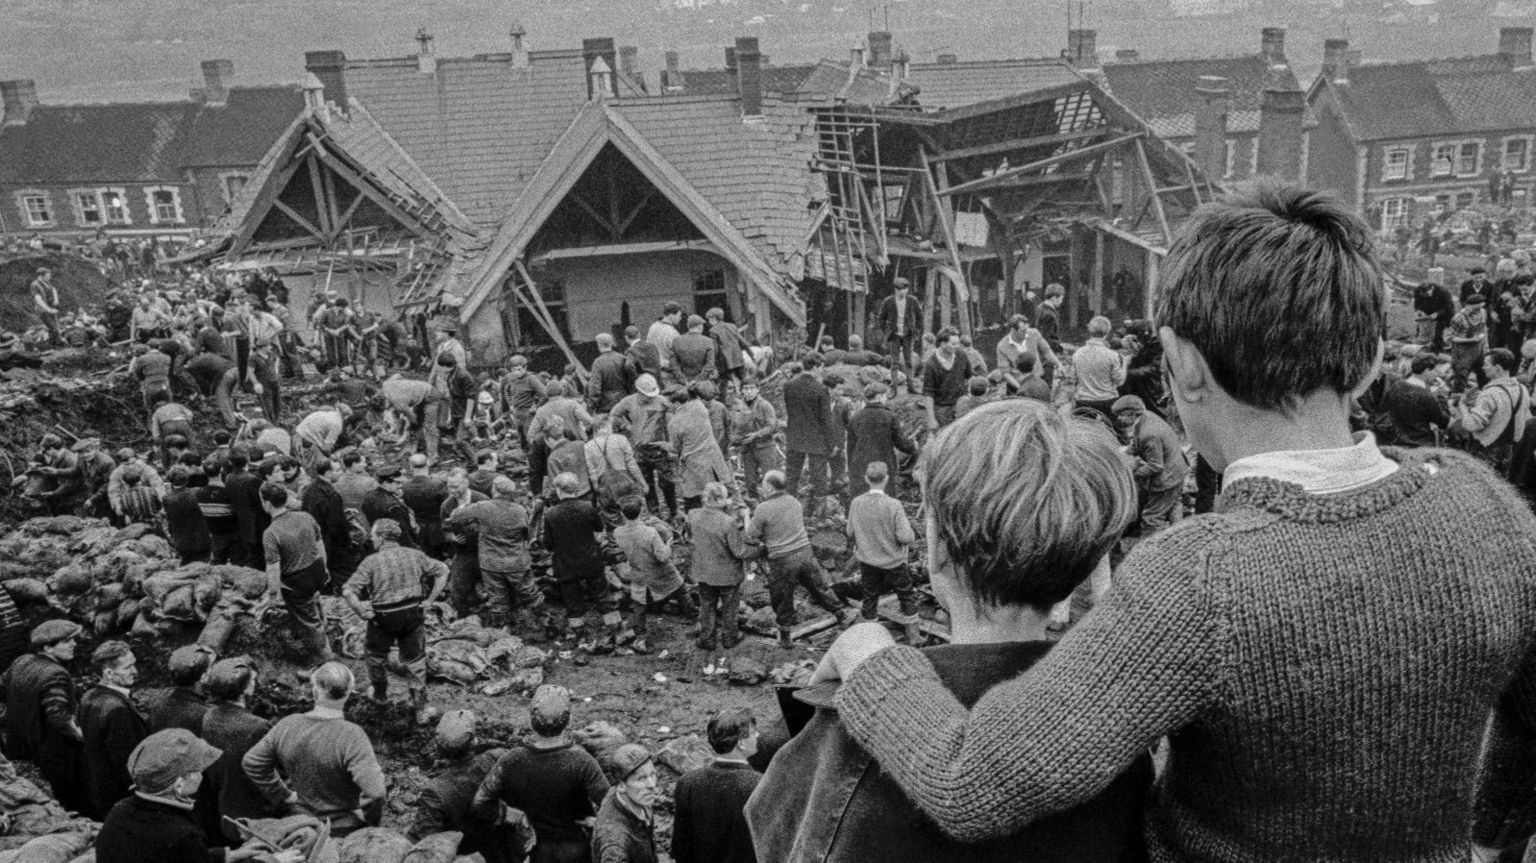 Tthe aftermath of the Aberfan disaster 